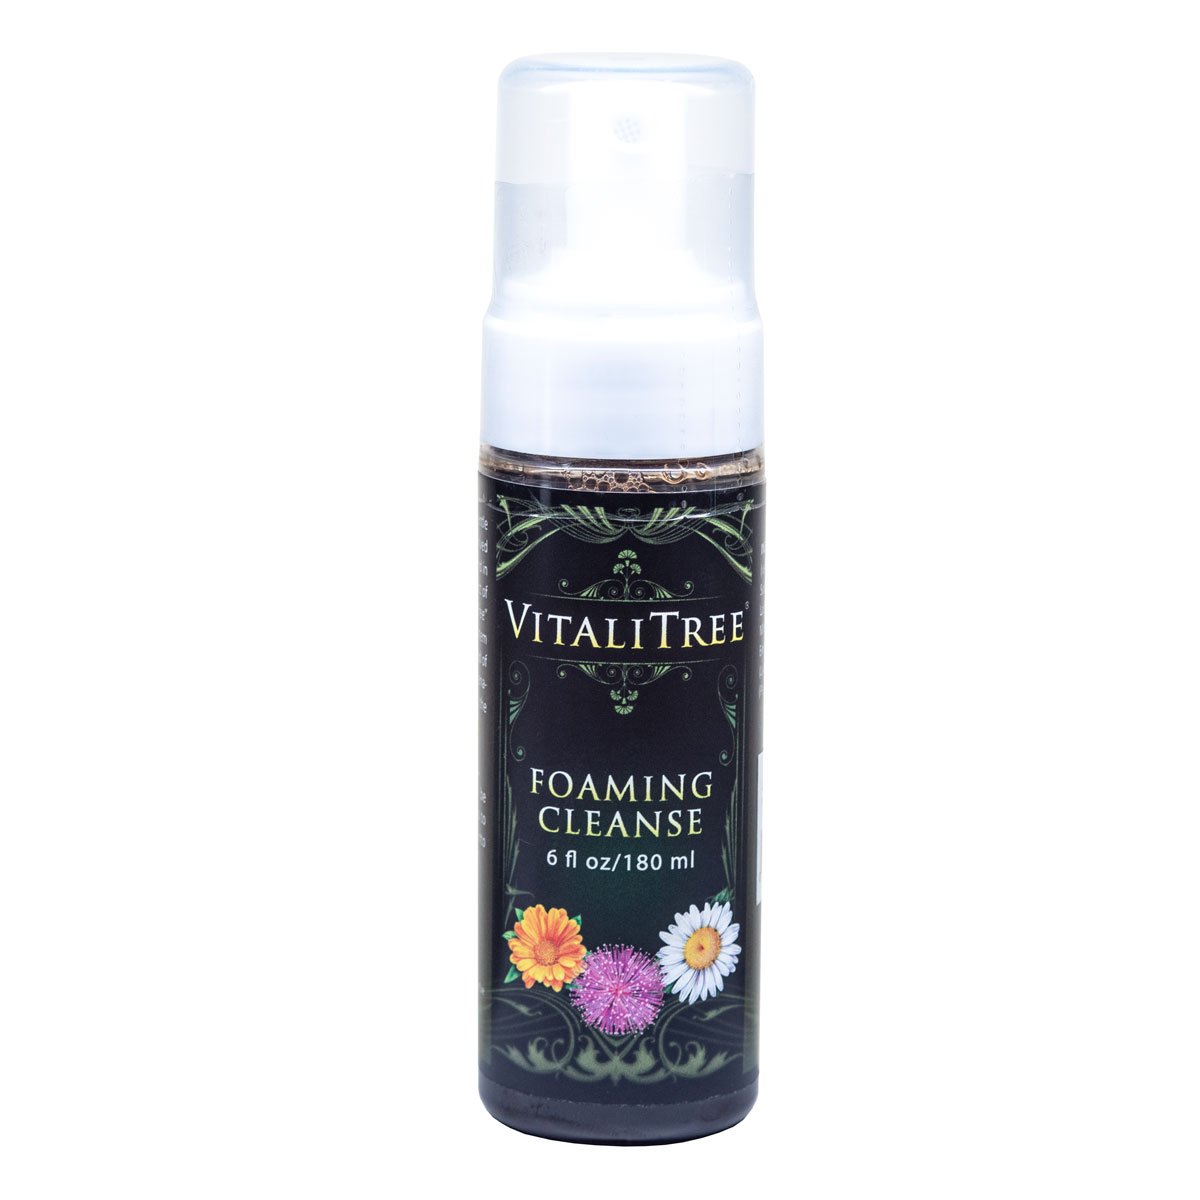 VitaliTree - Foaming Cleanse Skin Cleanser for Tattoo